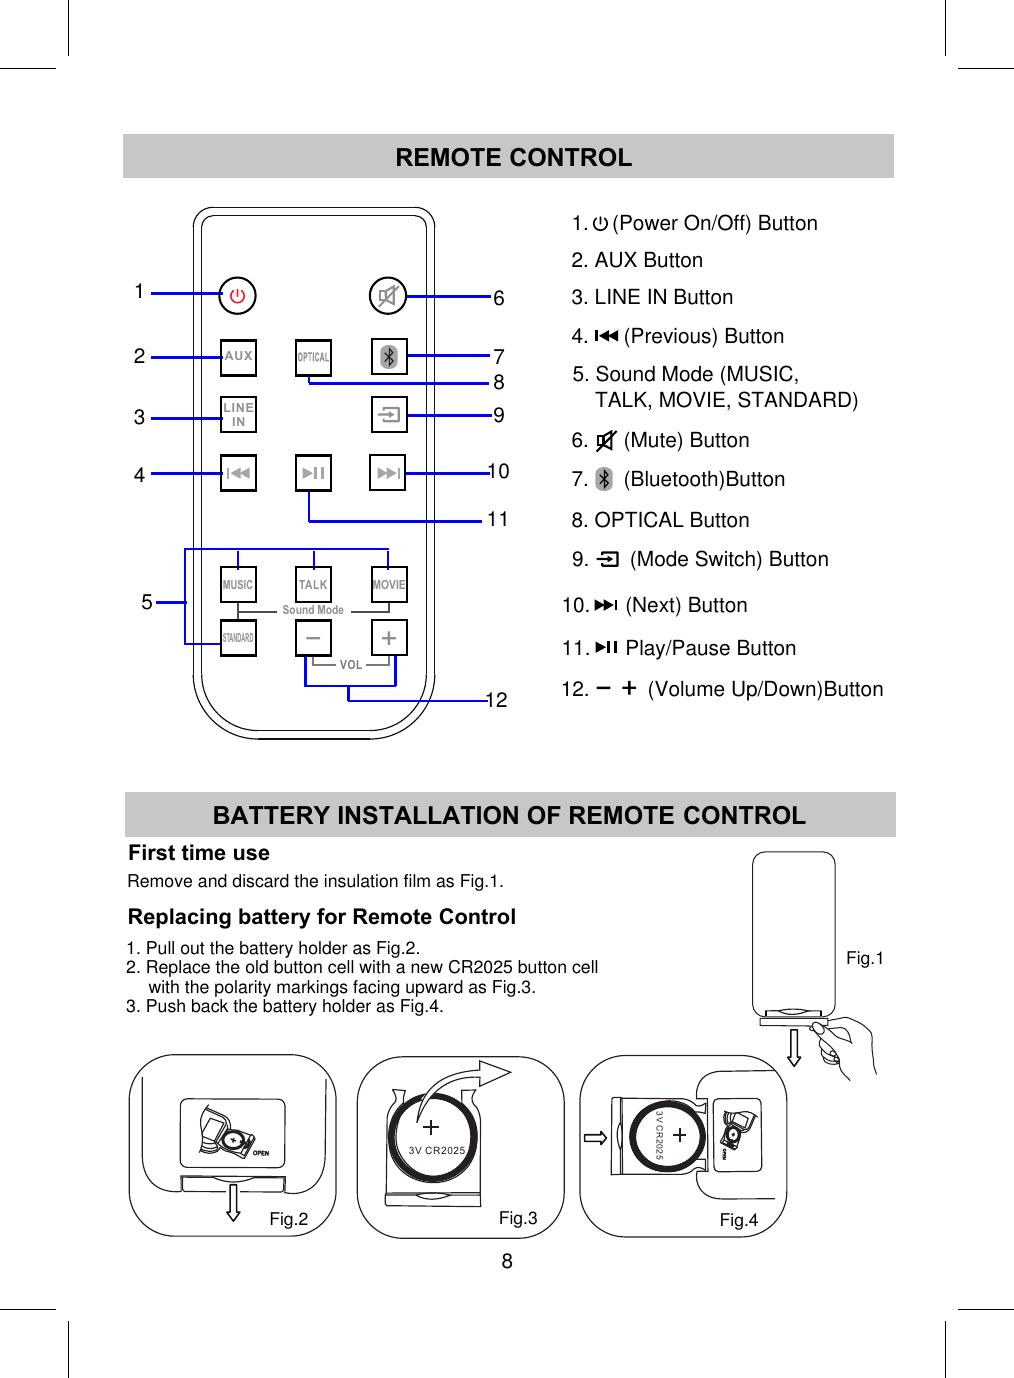 BATTERY INSTALLATION OF REMOTE CONTROLFig.1Fig.2 Fig.3Remove and discard the insulation film as Fig.1.Replacing battery for Remote ControlFirst time use8REMOTE CONTROL12345678910111.    (Power On/Off) Button2. AUX Button3. LINE IN Button4.      (Previous) Button6.      (Mute) Button10.      (Next) Button11.      Play/Pause Button12.          (Volume Up/Down)Button9.       (Mode Switch) ButtonOPENOPEN3V CR20253V CR20251. Pull out the battery holder as Fig.2.2. Replace the old button cell with a new CR2025 button cell  with the polarity markings facing upward as Fig.3.3. Push back the battery holder as Fig.4.Fig.4AUX OPTICALLINEIN      TALK MOVIEMUSICSound ModeVOLSTANDARD127.      (Bluetooth)Button8. OPTICAL Button5. Sound Mode (MUSIC, TALK, MOVIE, STANDARD)      